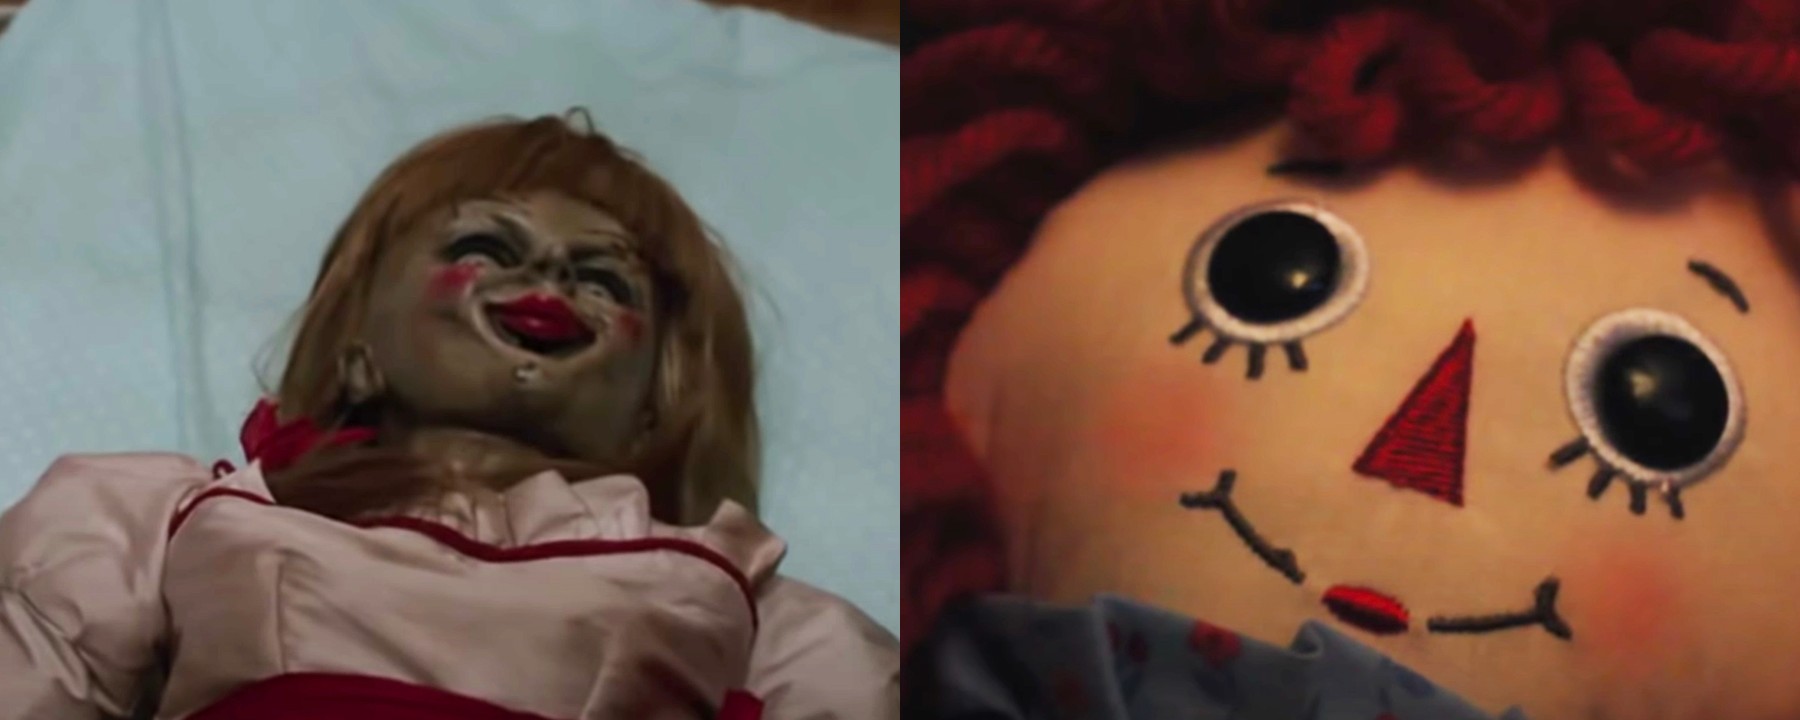 Haunted Doll Experts Explain What Would Happen If the Real 'Annabelle'  Escaped